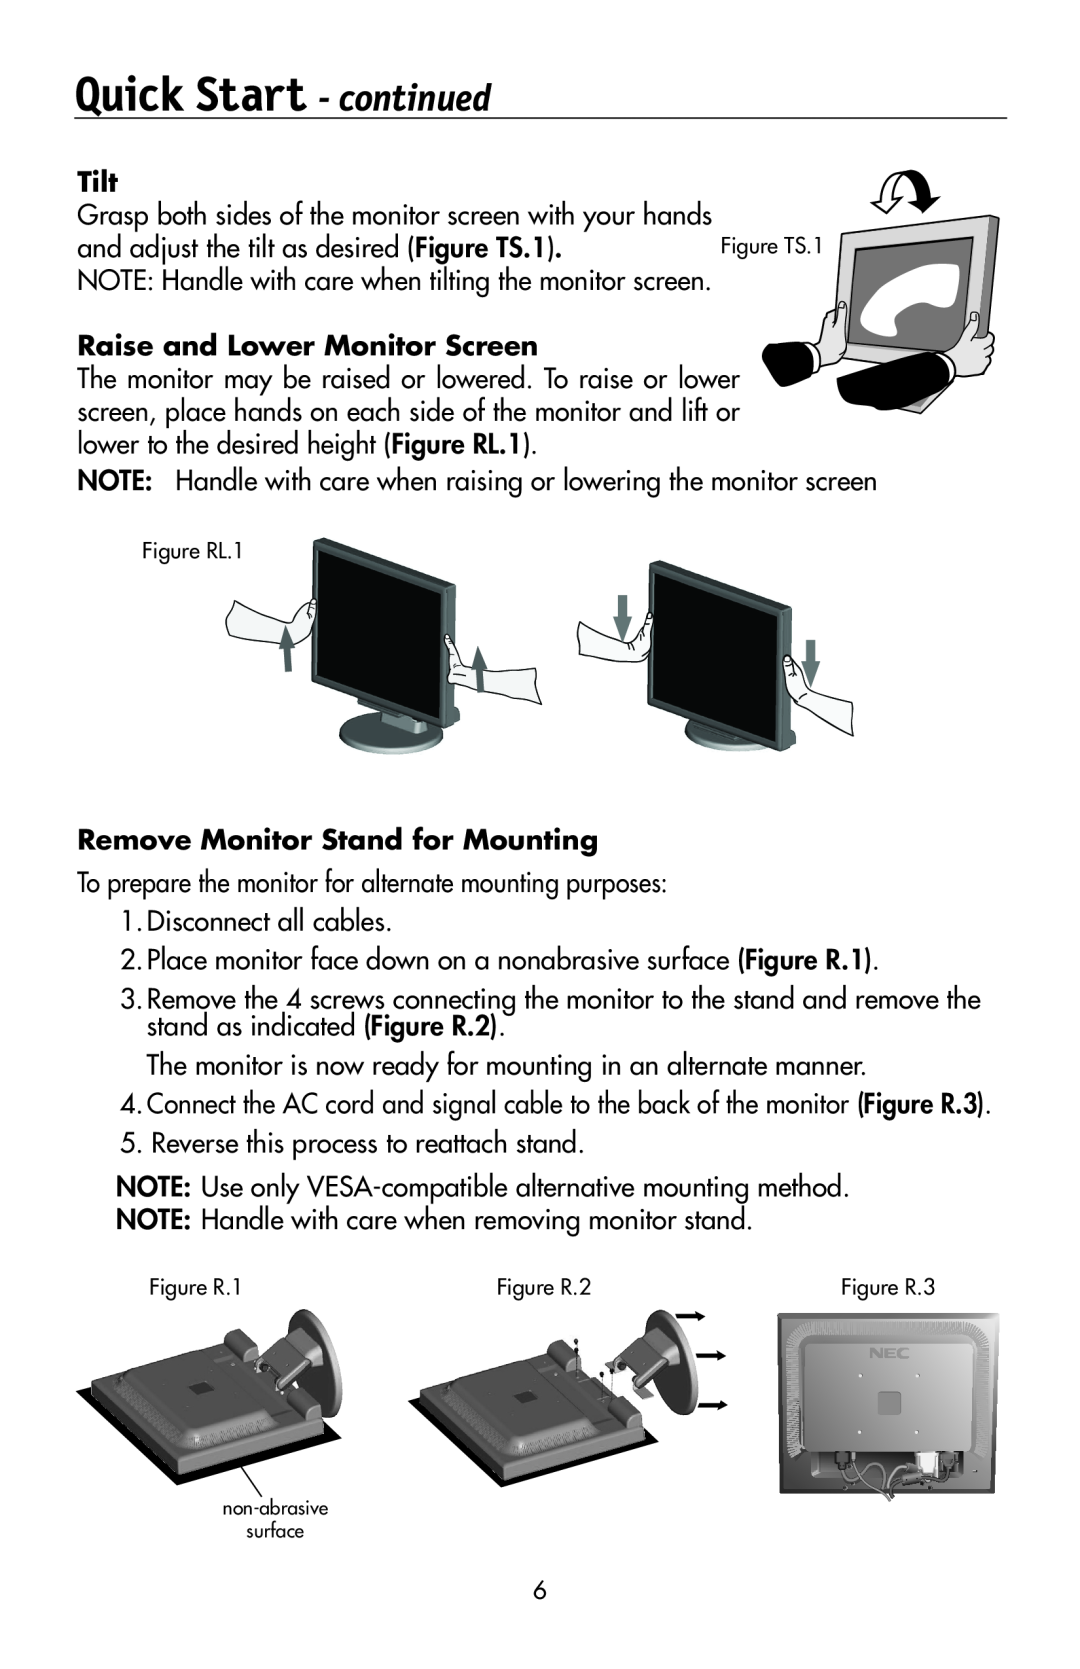 NEC 175VXM user manual Tilt, Raise and Lower Monitor Screen, Remove Monitor Stand for Mounting, Quick Start - continued 